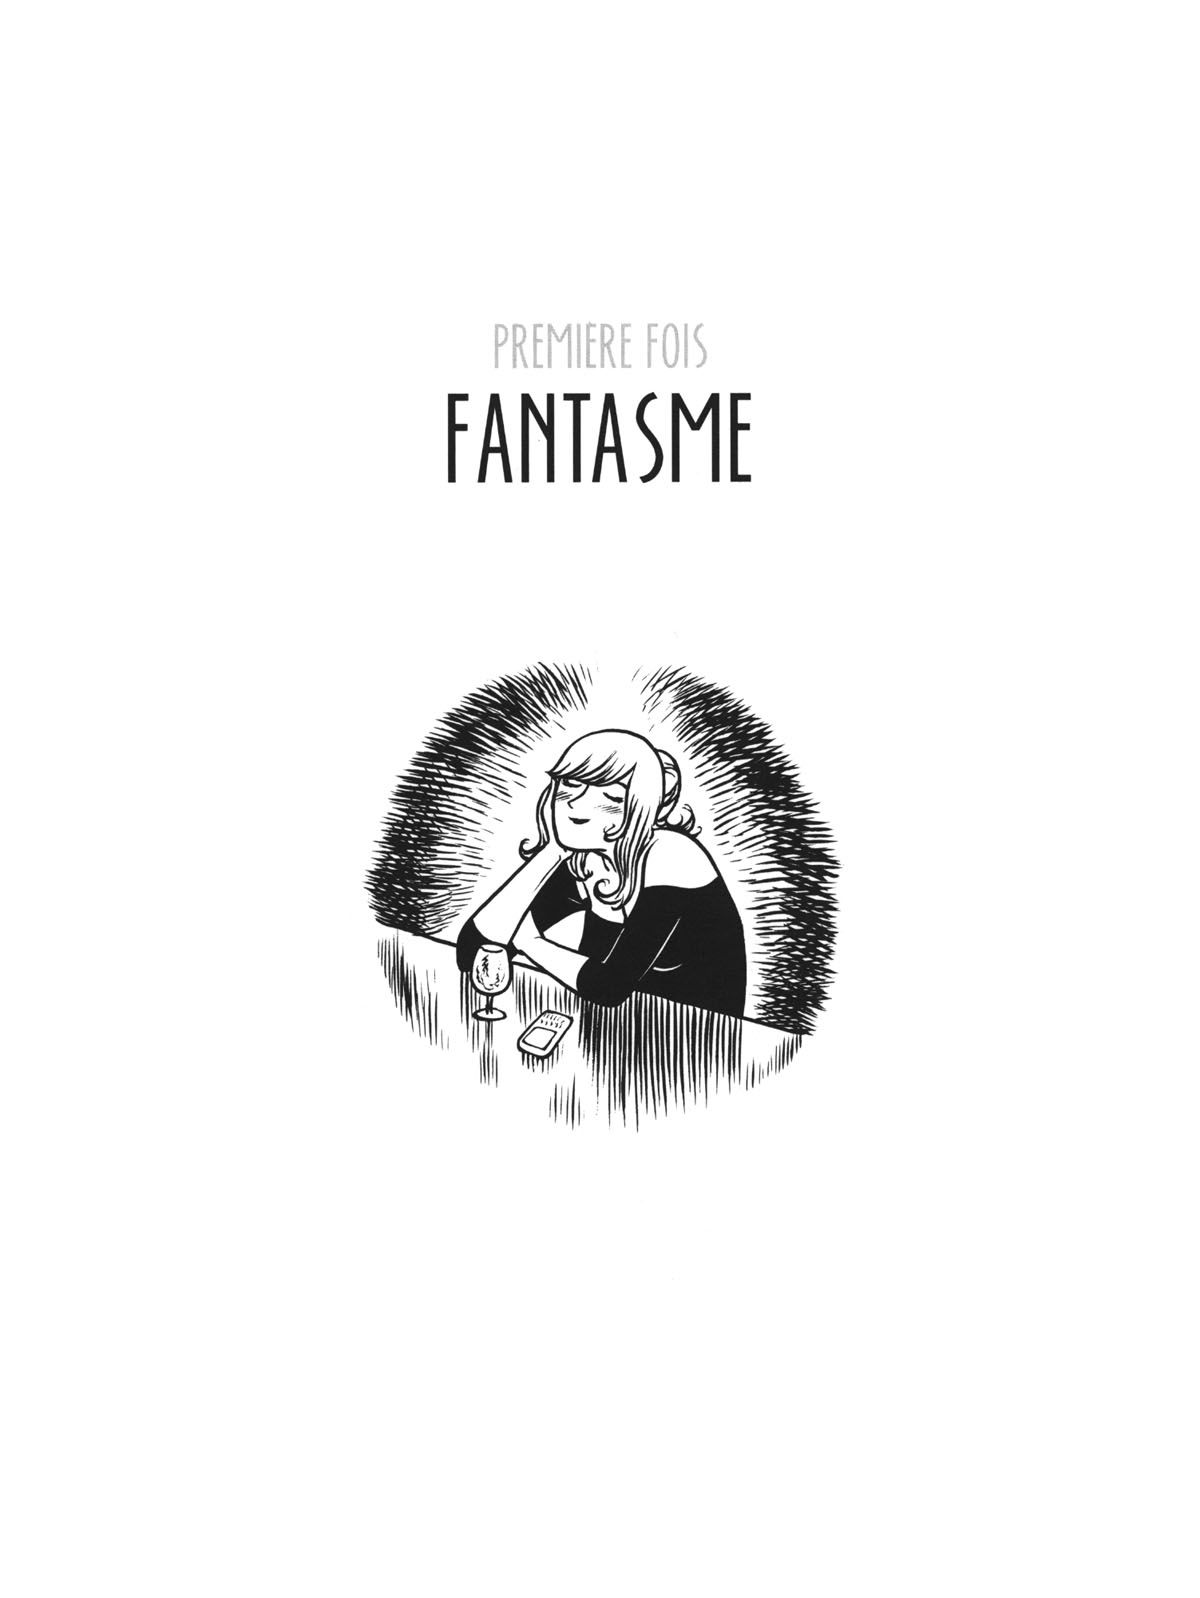 [Sibylline & various artists] Premières Fois [French] 28